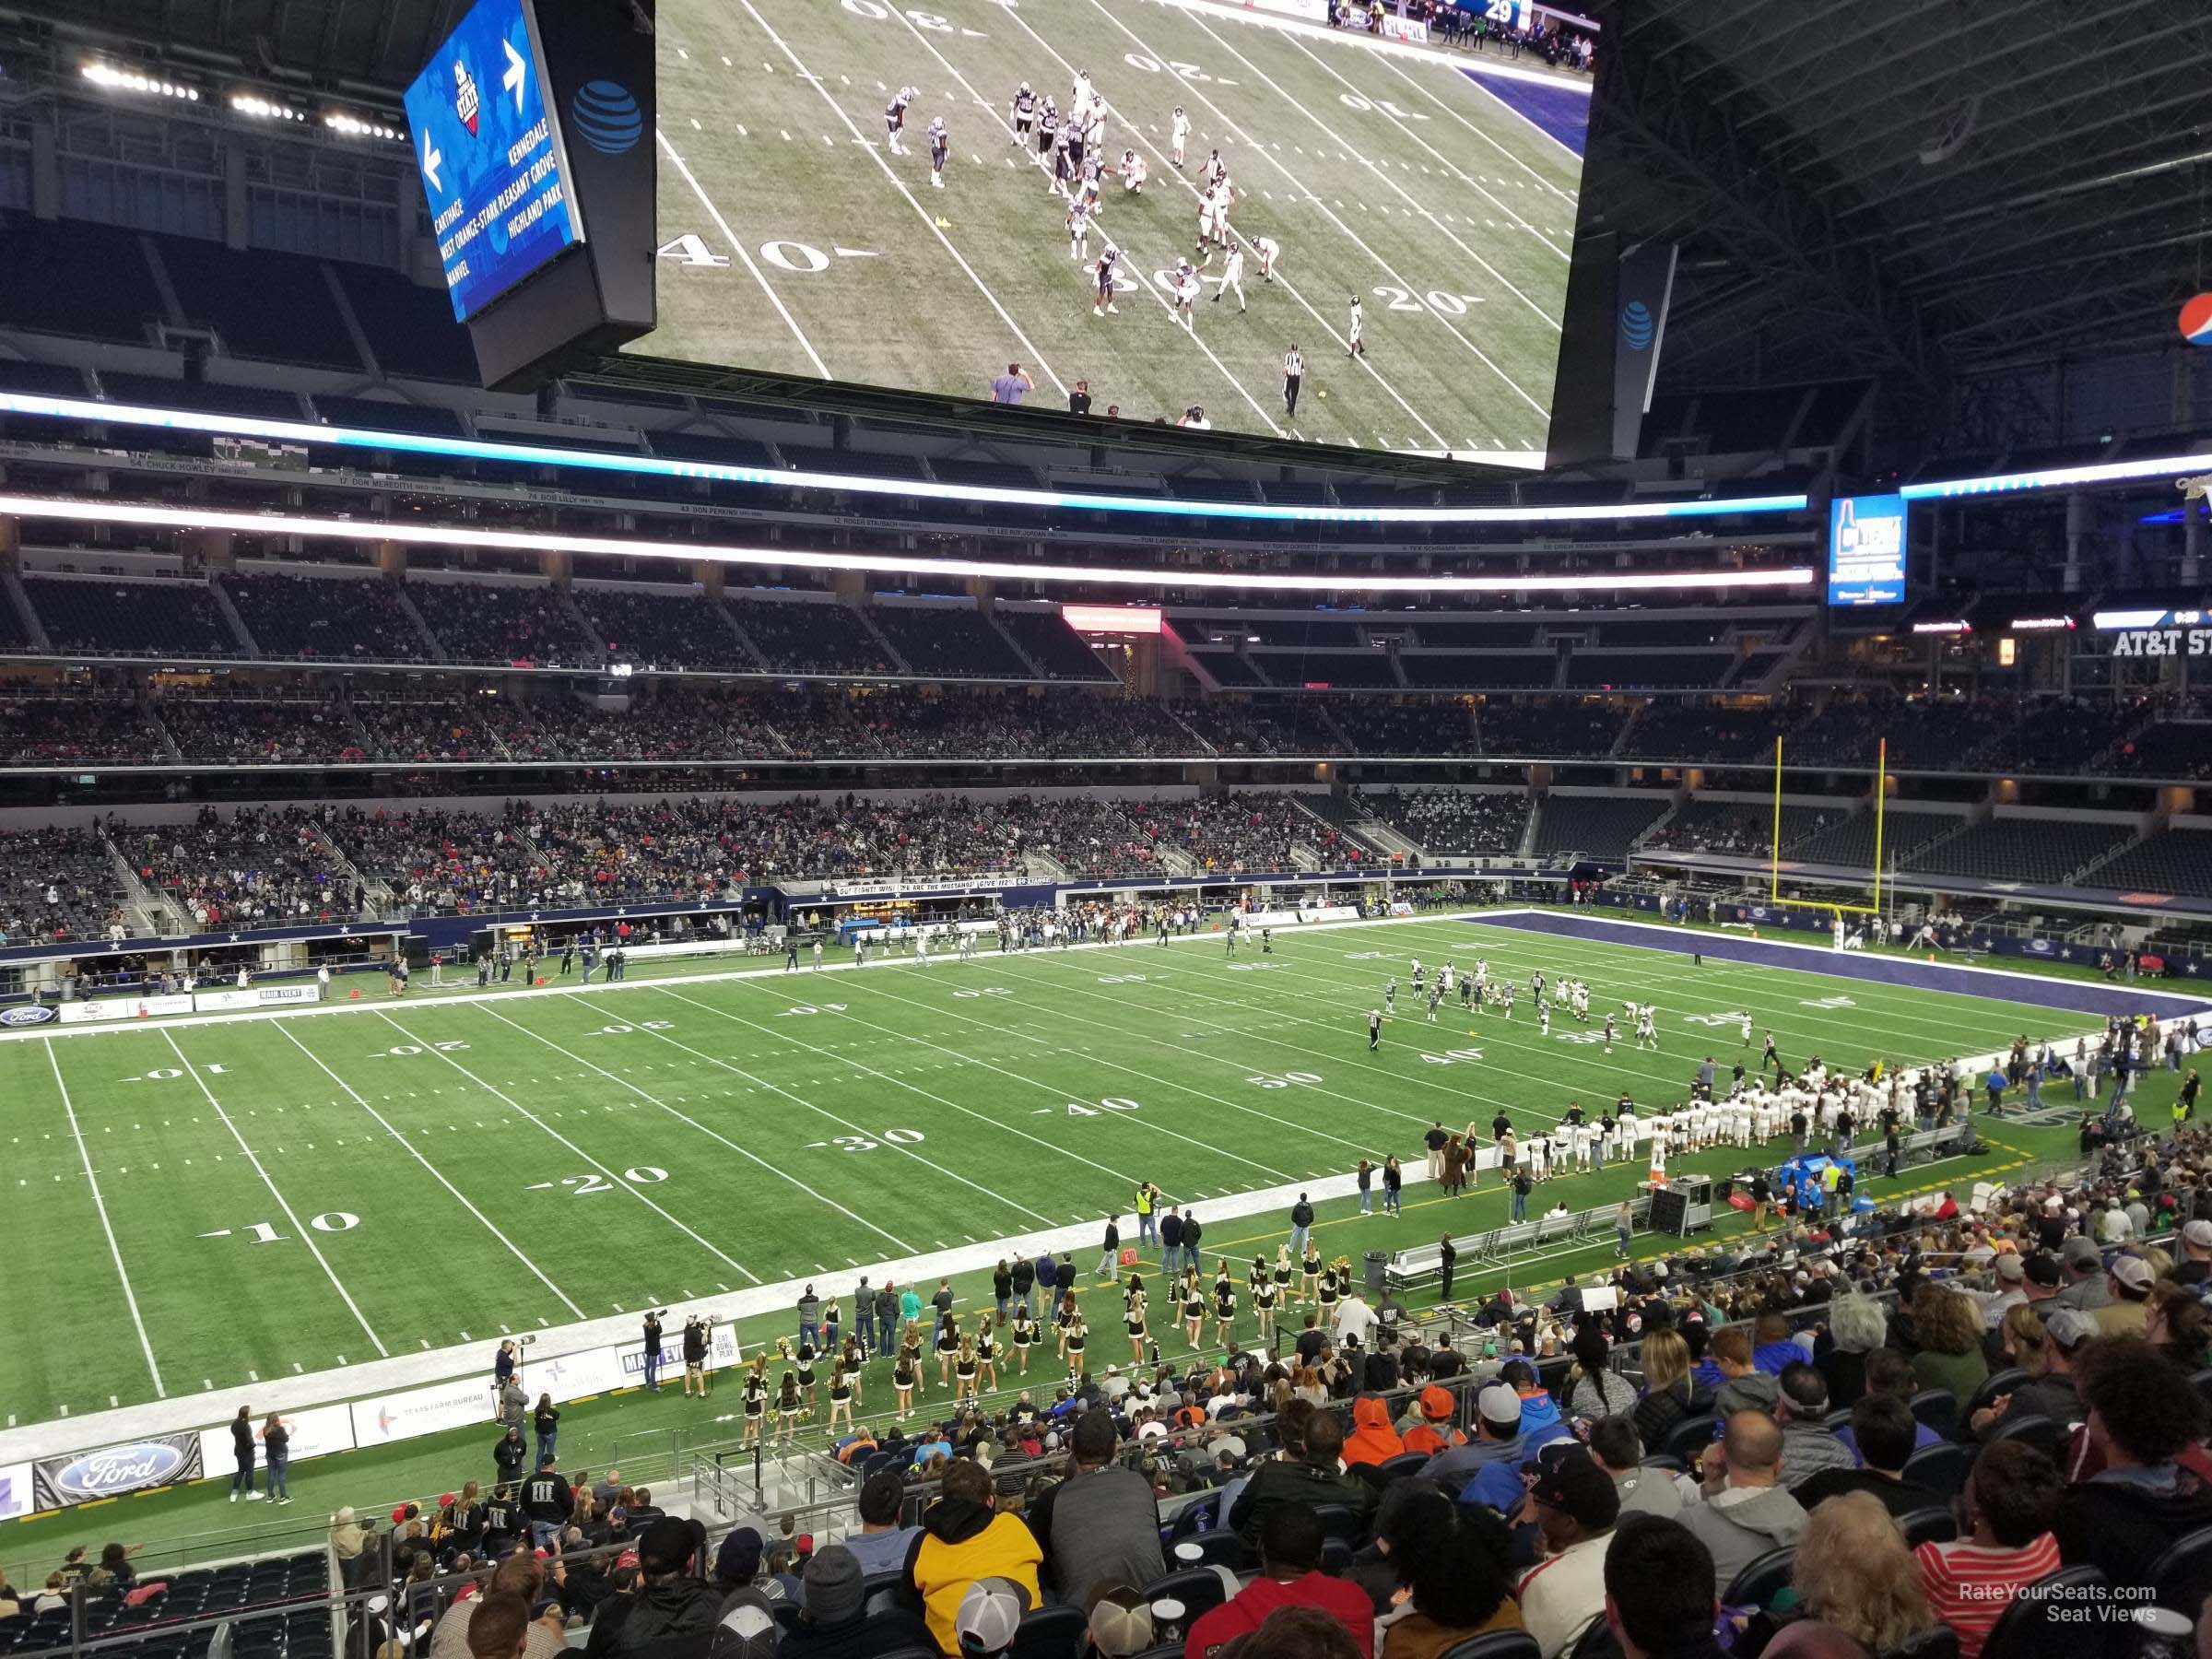 section c239, row 10 seat view  for football - at&t stadium (cowboys stadium)